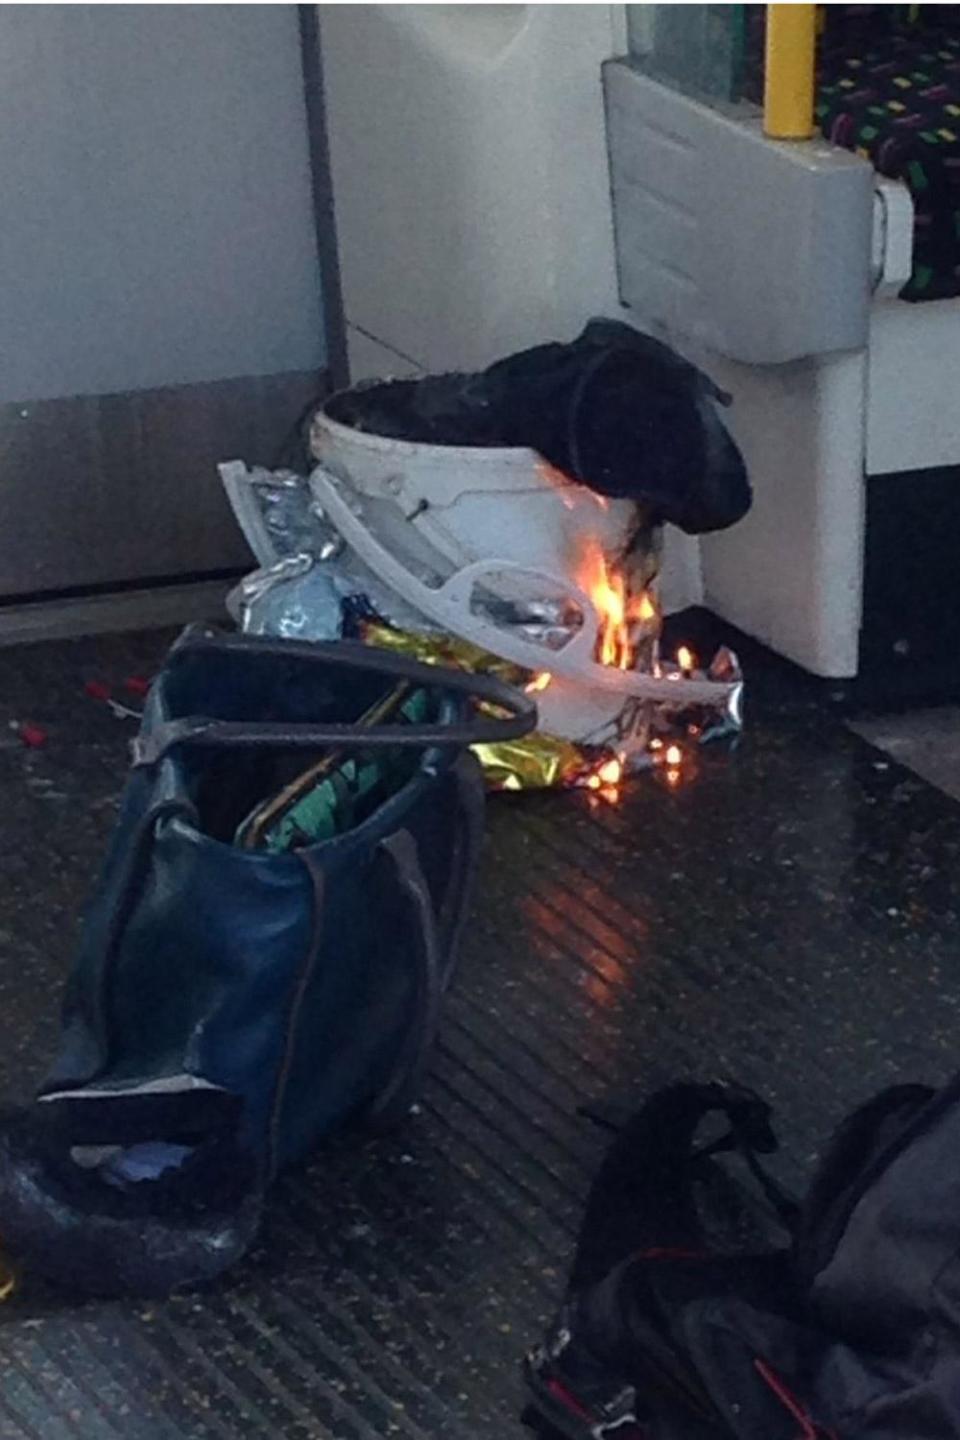 Flames coming from the apparent cause of the explosion, a bucket wrapped in a Lidl carrier bag. (@RRigs)